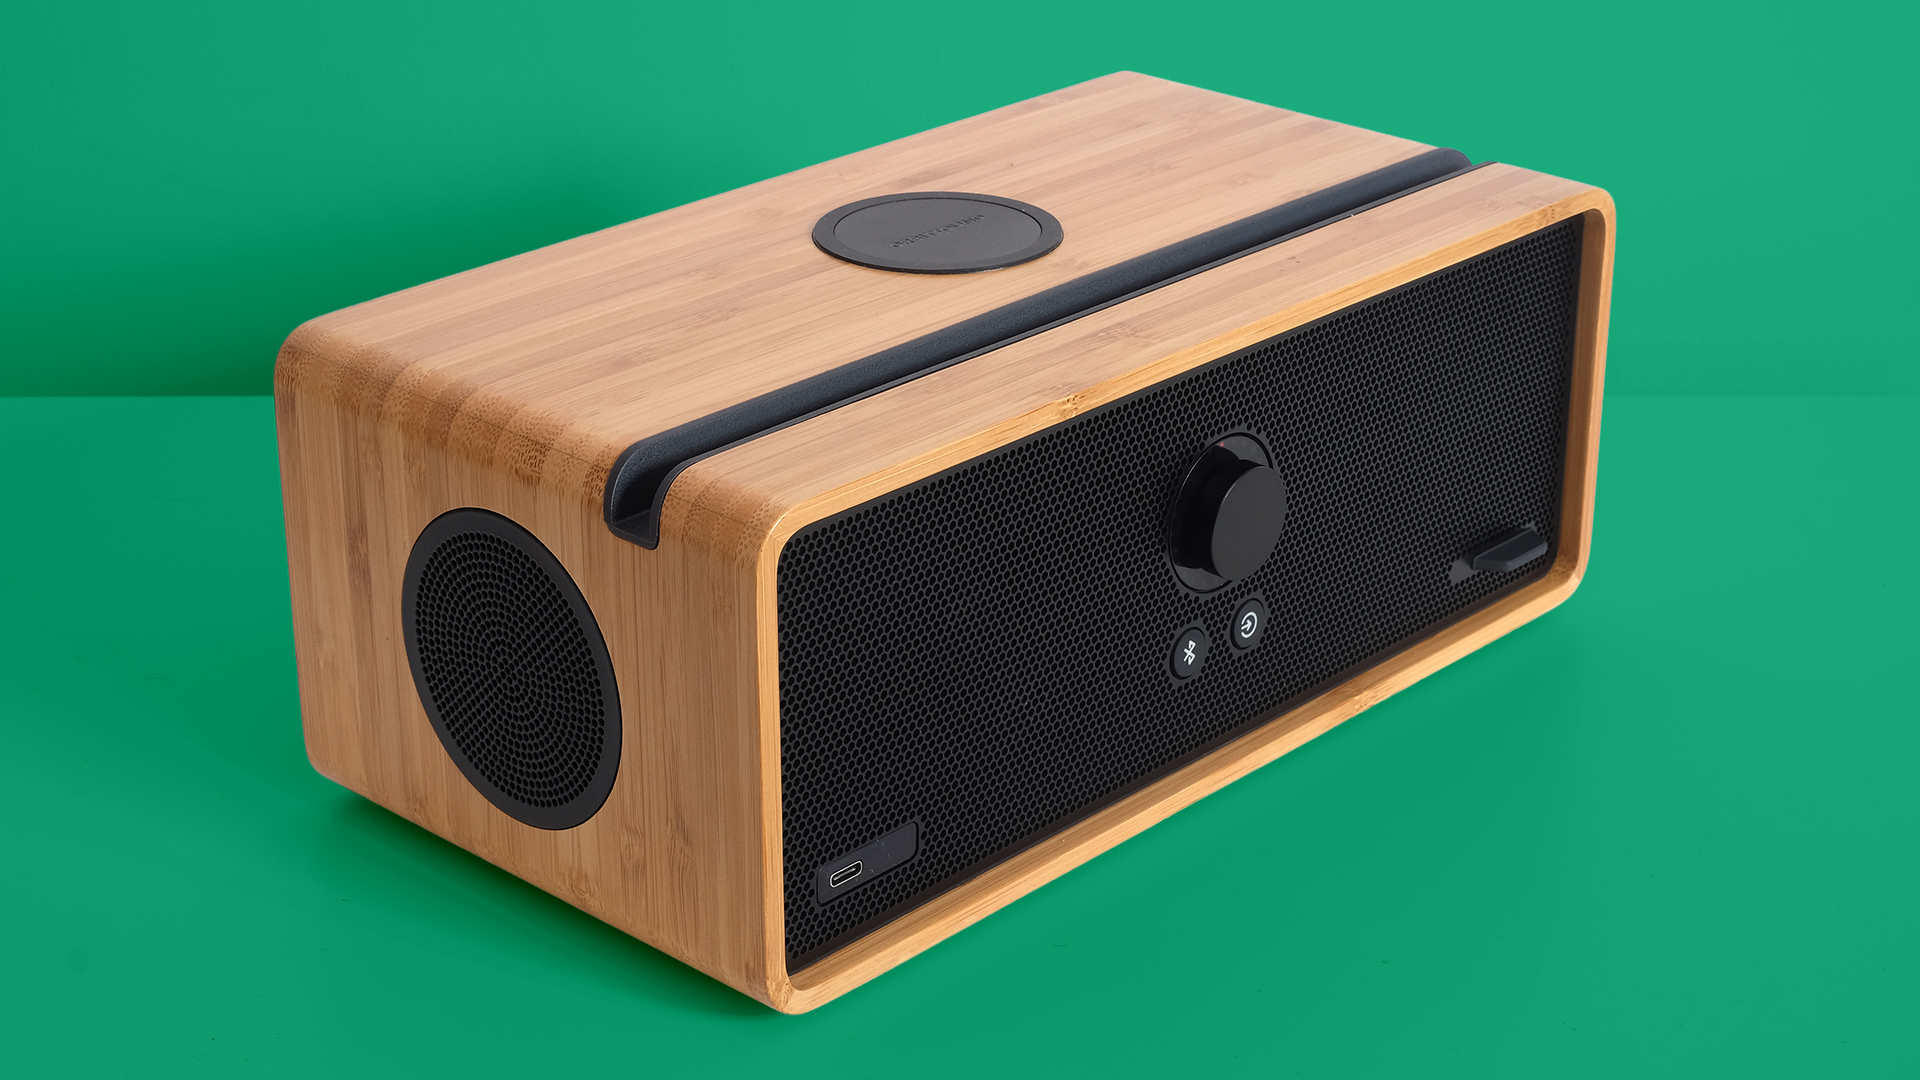 Best AirPlay speakers: Orbitsound Dock E30